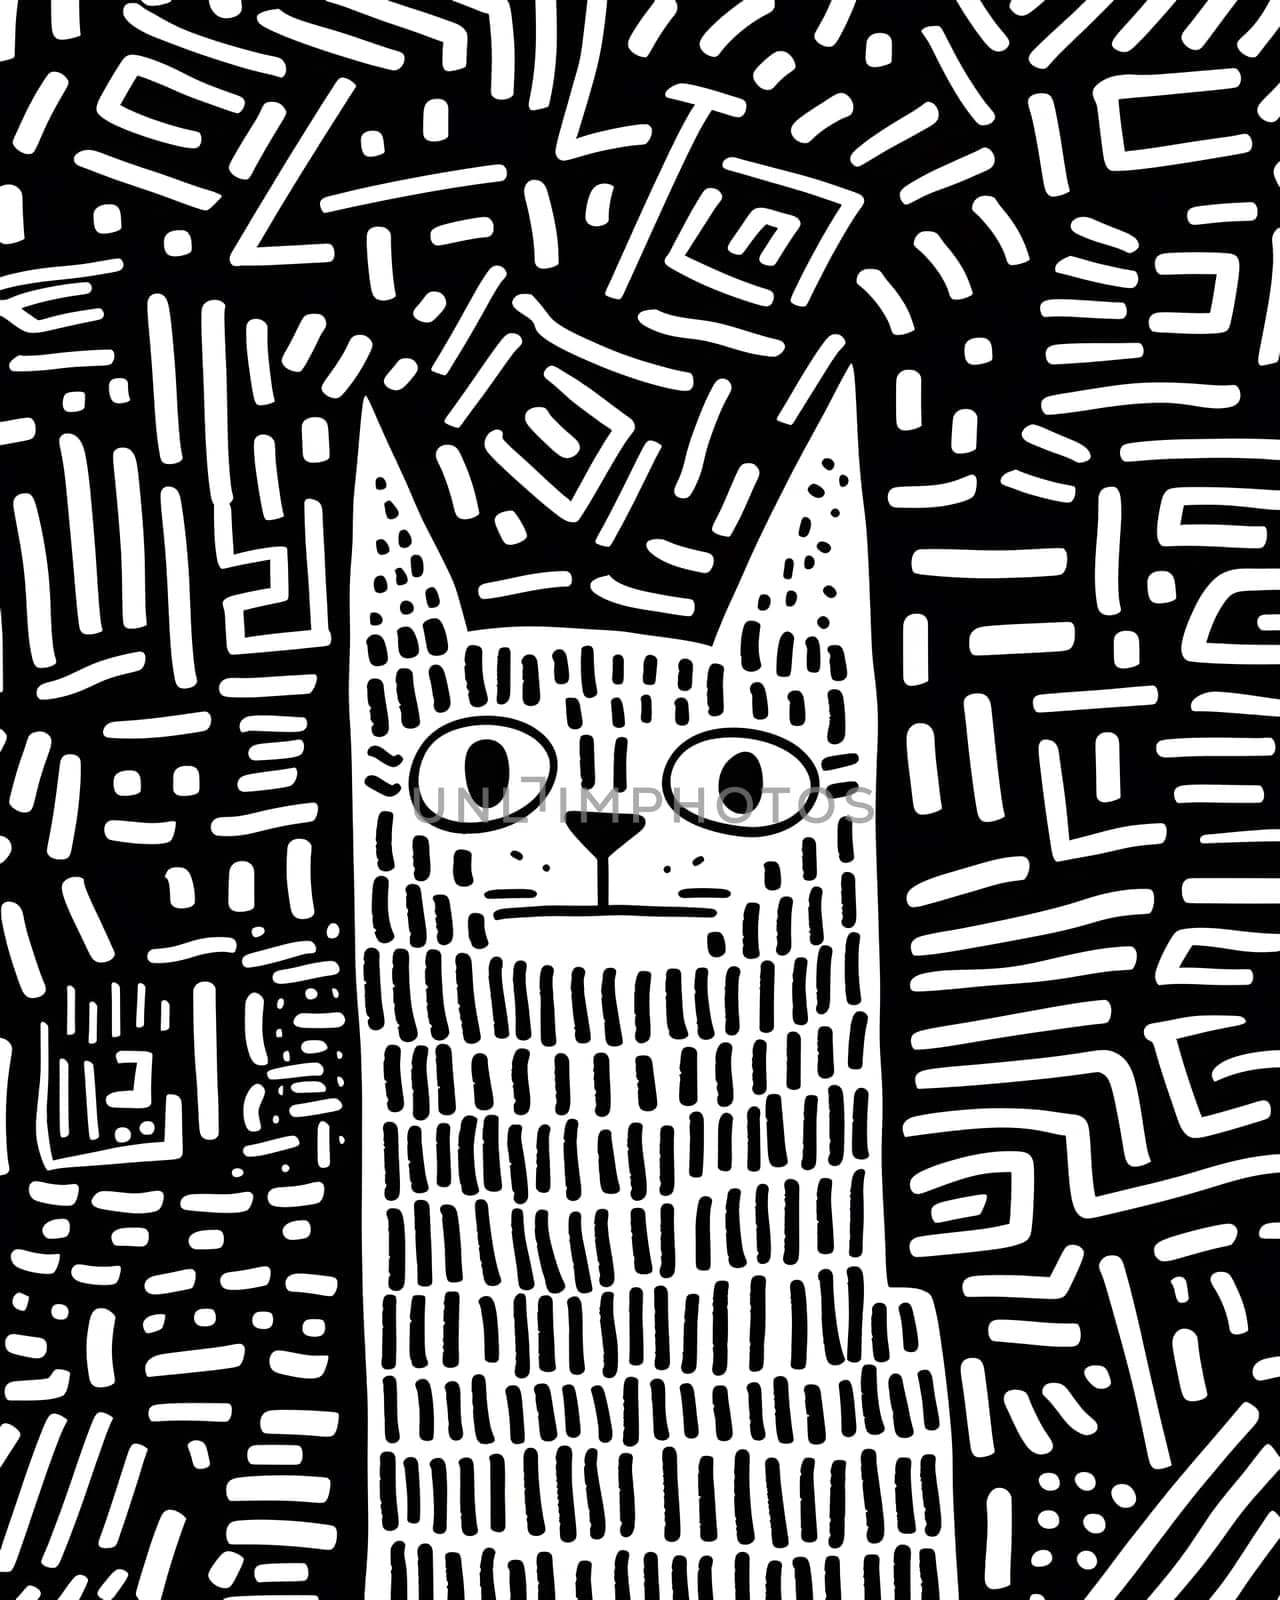 A Vertebrateinspired blackandwhite drawing of a cat with a geometric pattern. The Rectangle style and Symmetry create a unique textilelike artwork